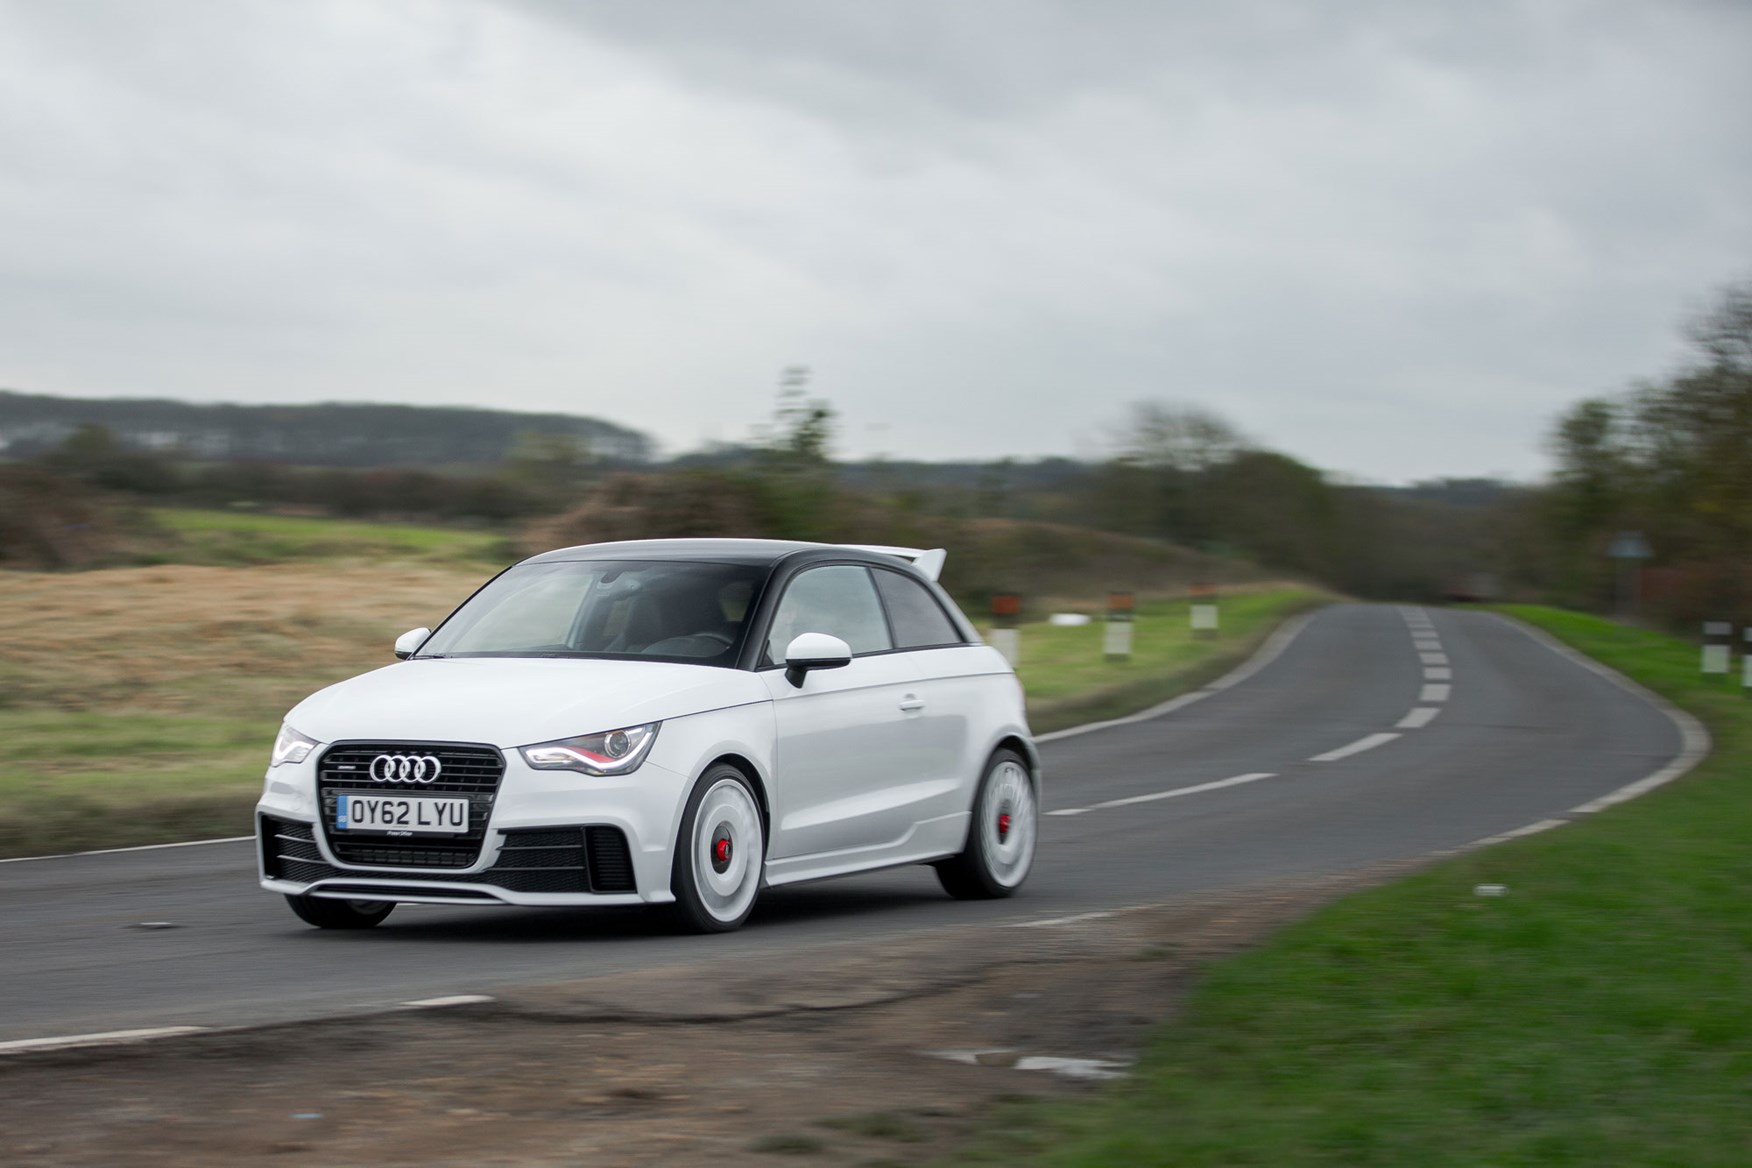 2015 Audi S1: The Hottest of Small Hatches